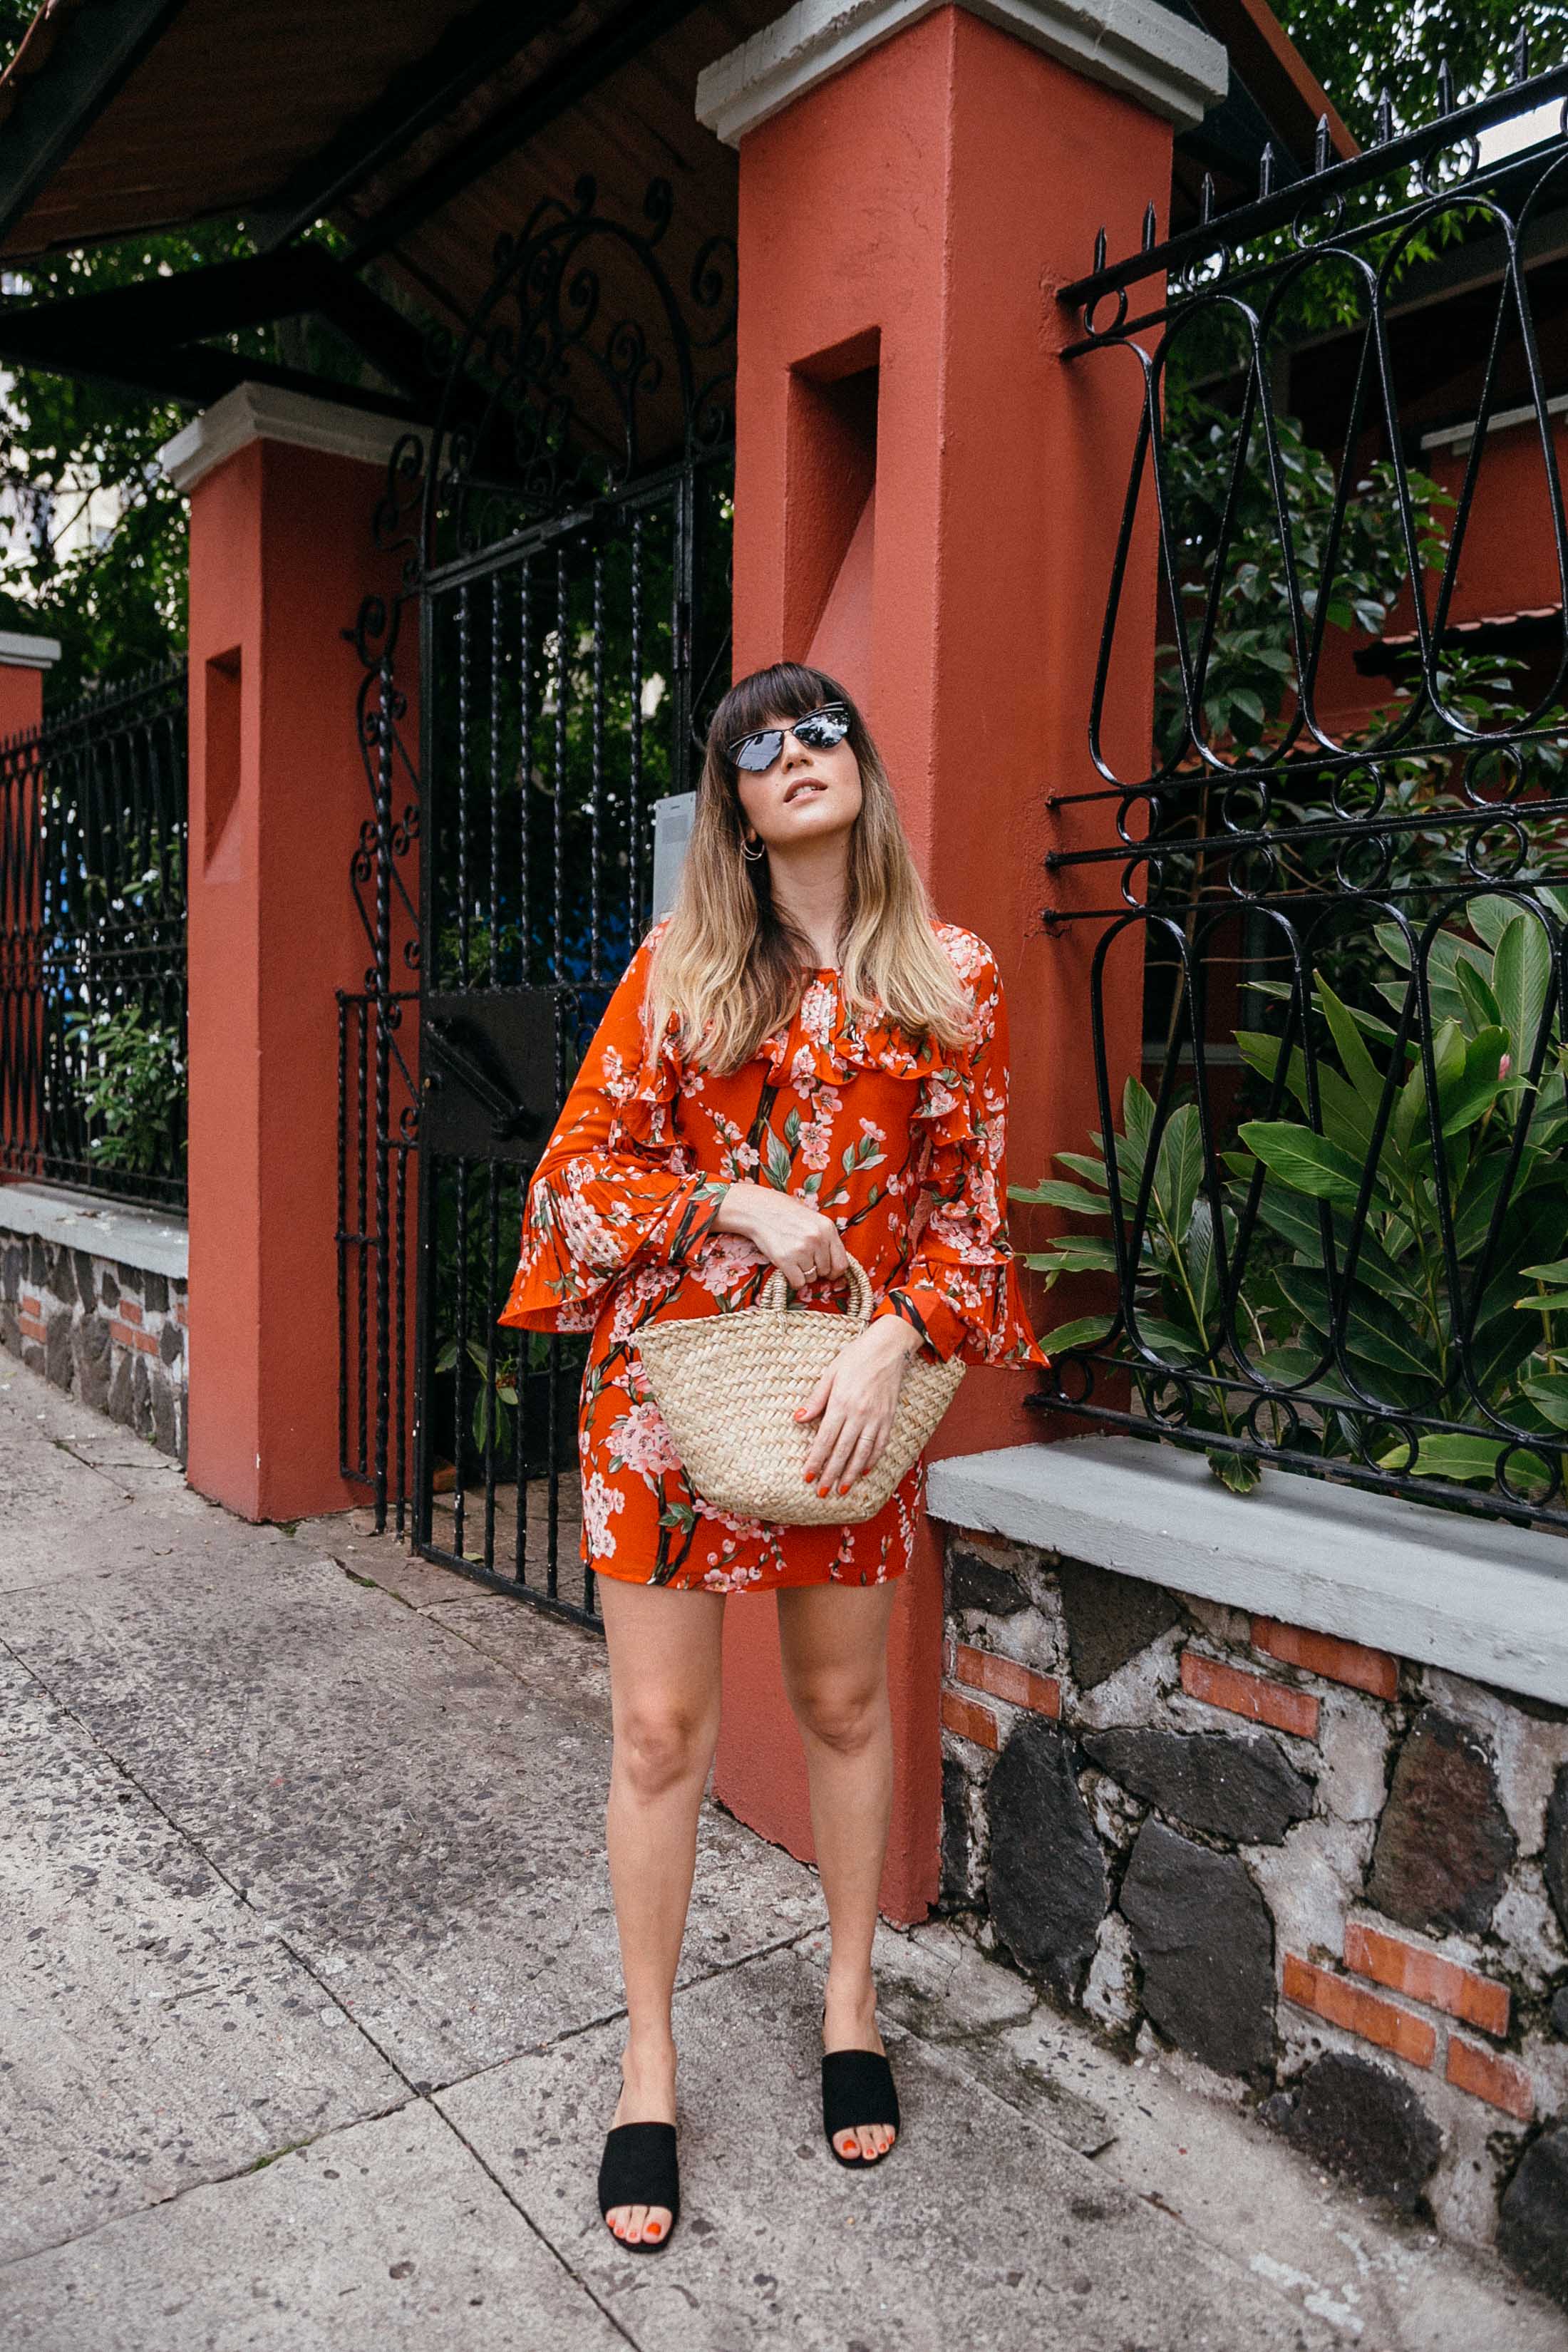 Maristella wears a red floral dress, black mules, straw bag and cat eye sunglasses